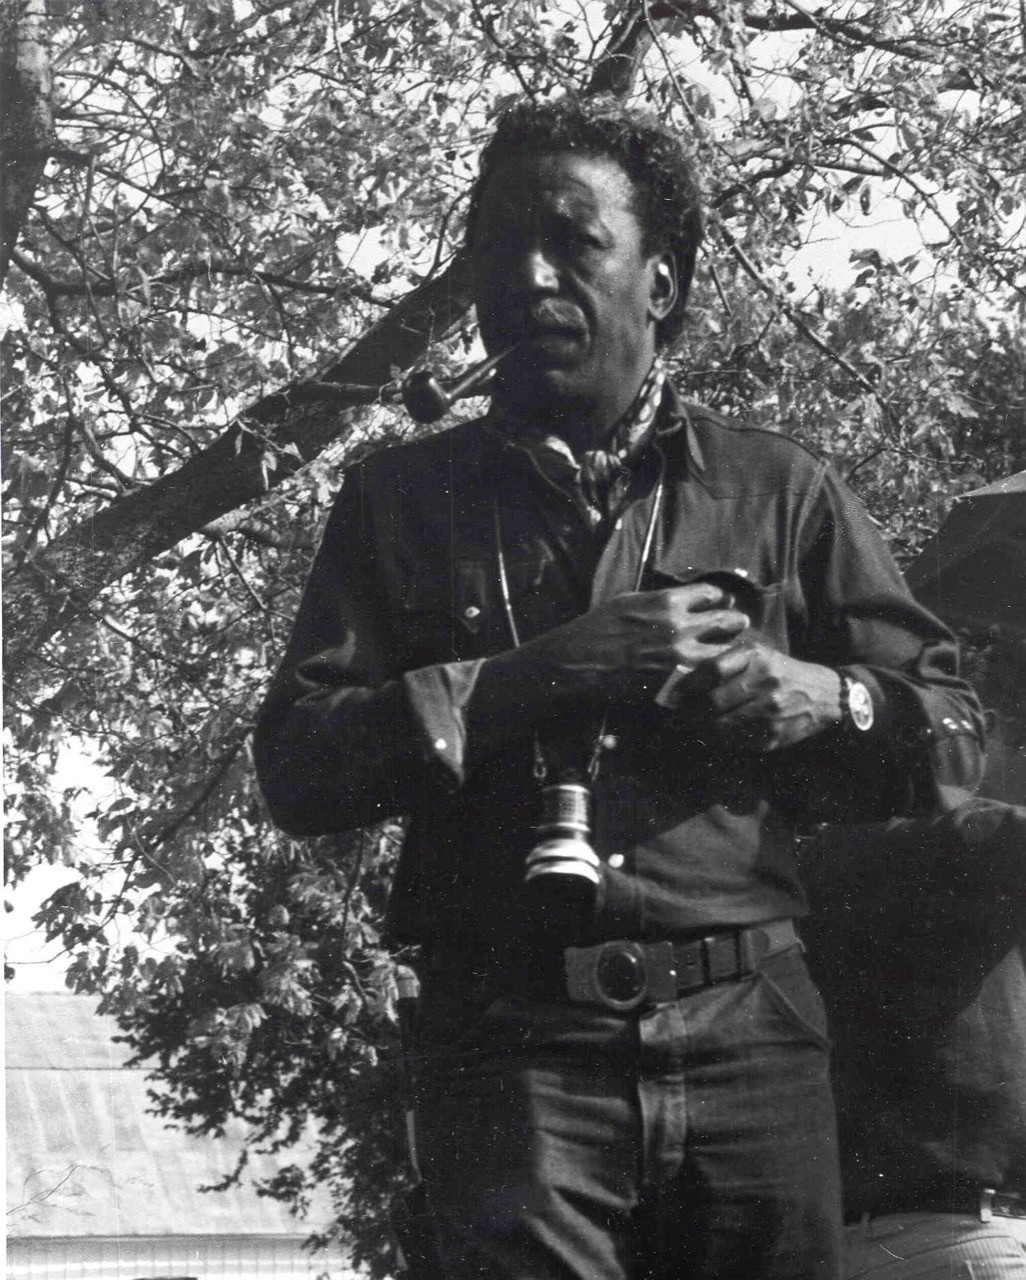 Director Gordon Parks is smoking a pipe as he reaches for his shirt pocket. A camera lens hangs from his neck.